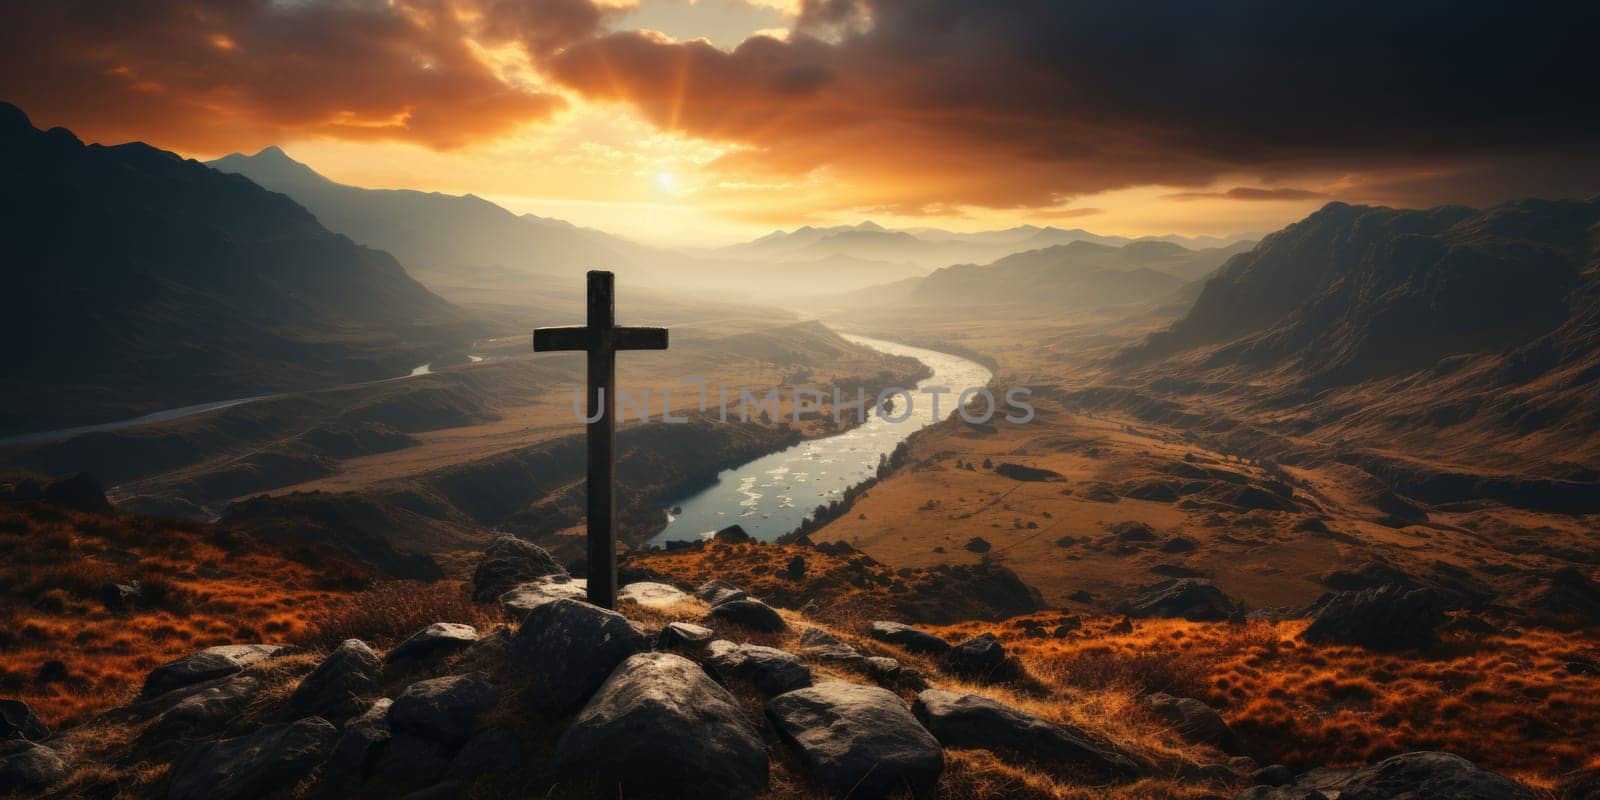 Cross on Hill Beside River by but_photo